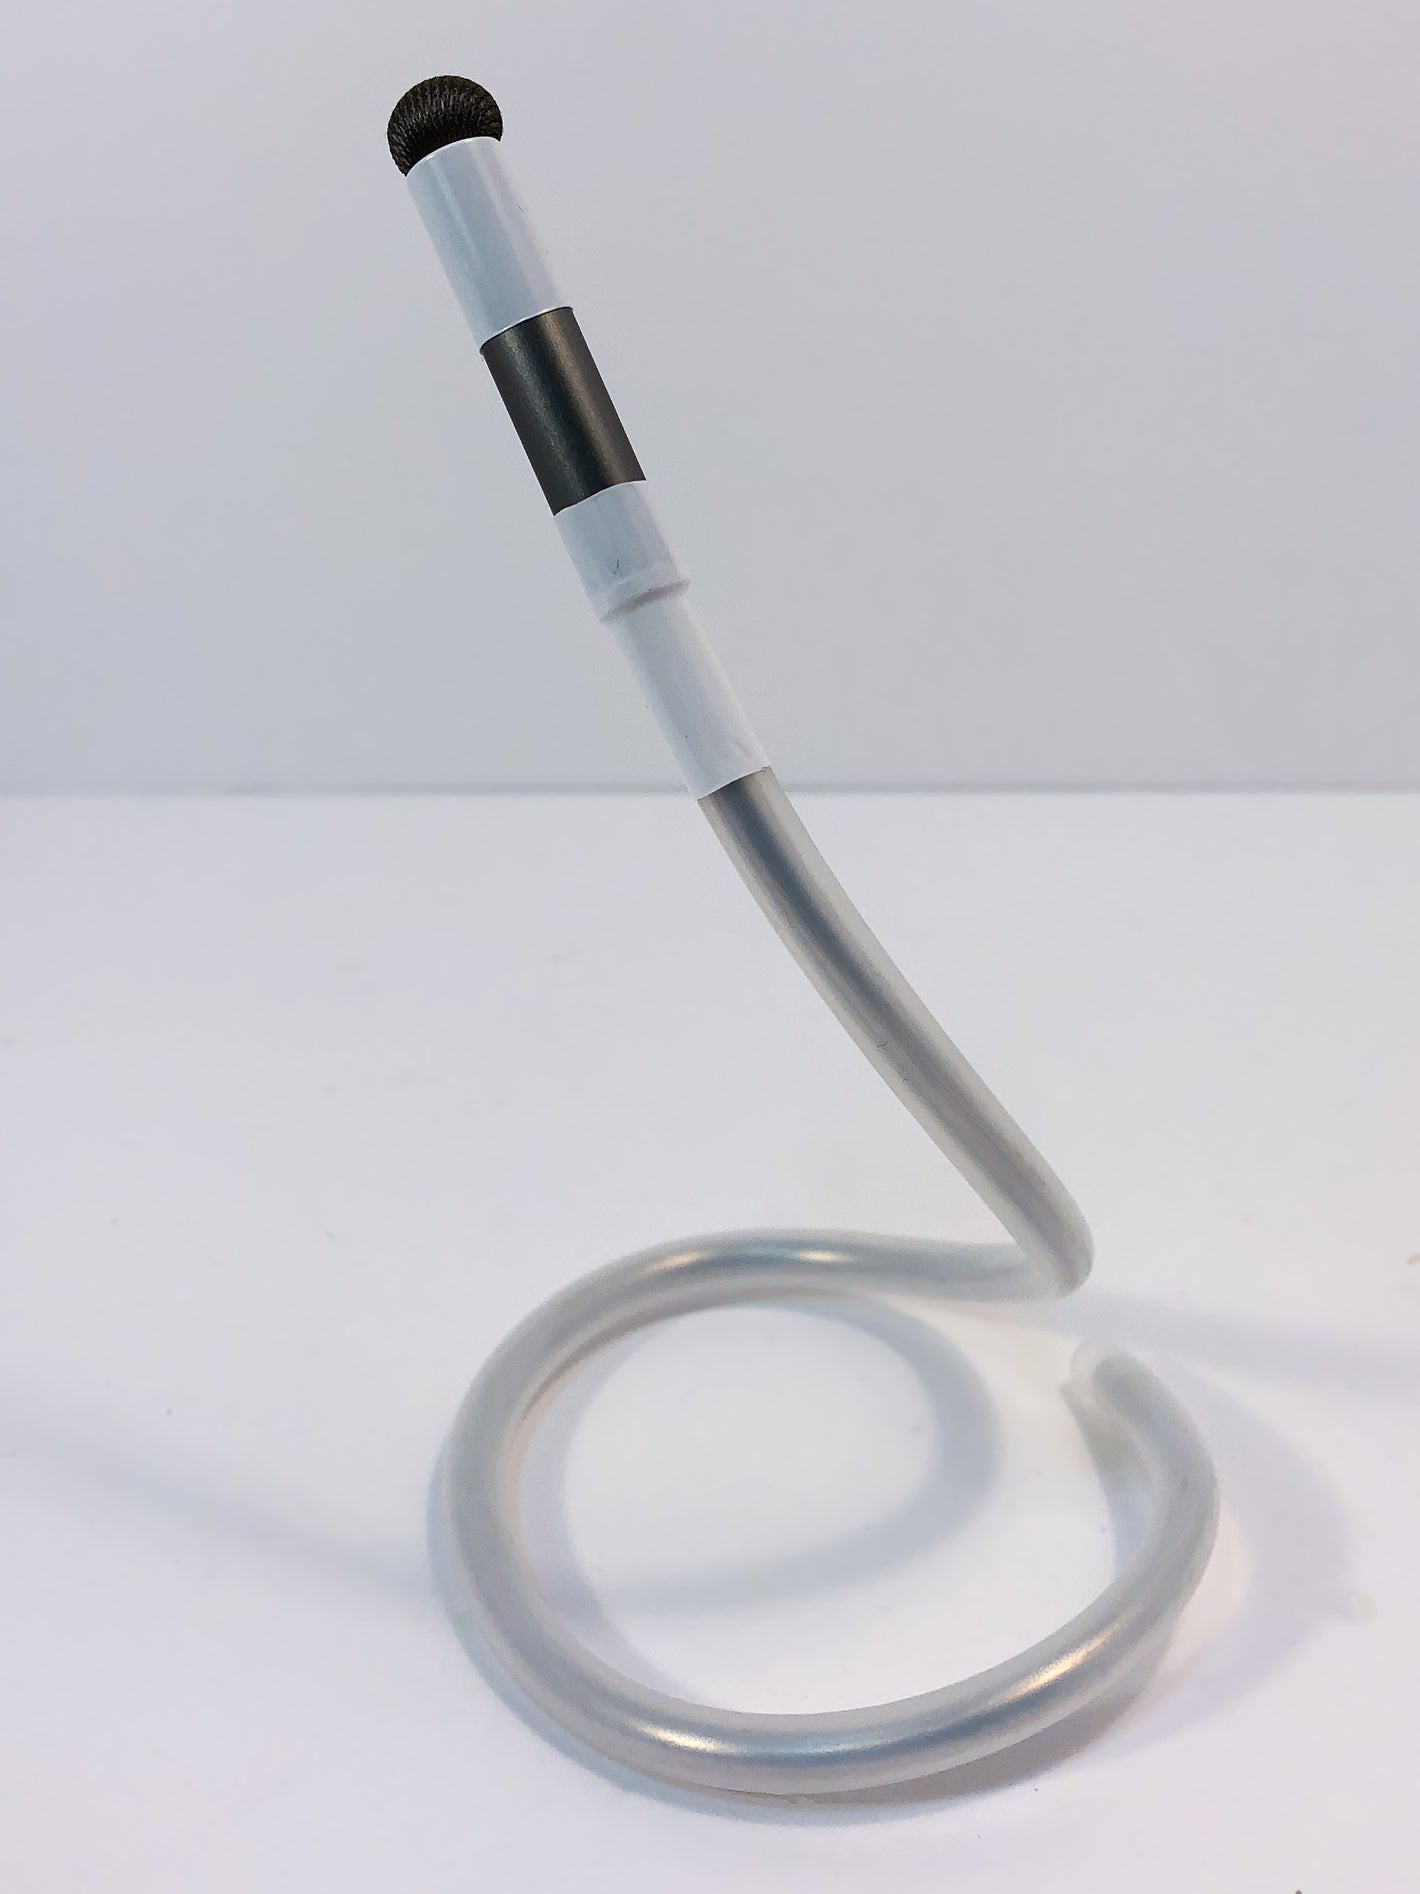 A bendable stylus bend to stand upright on its own